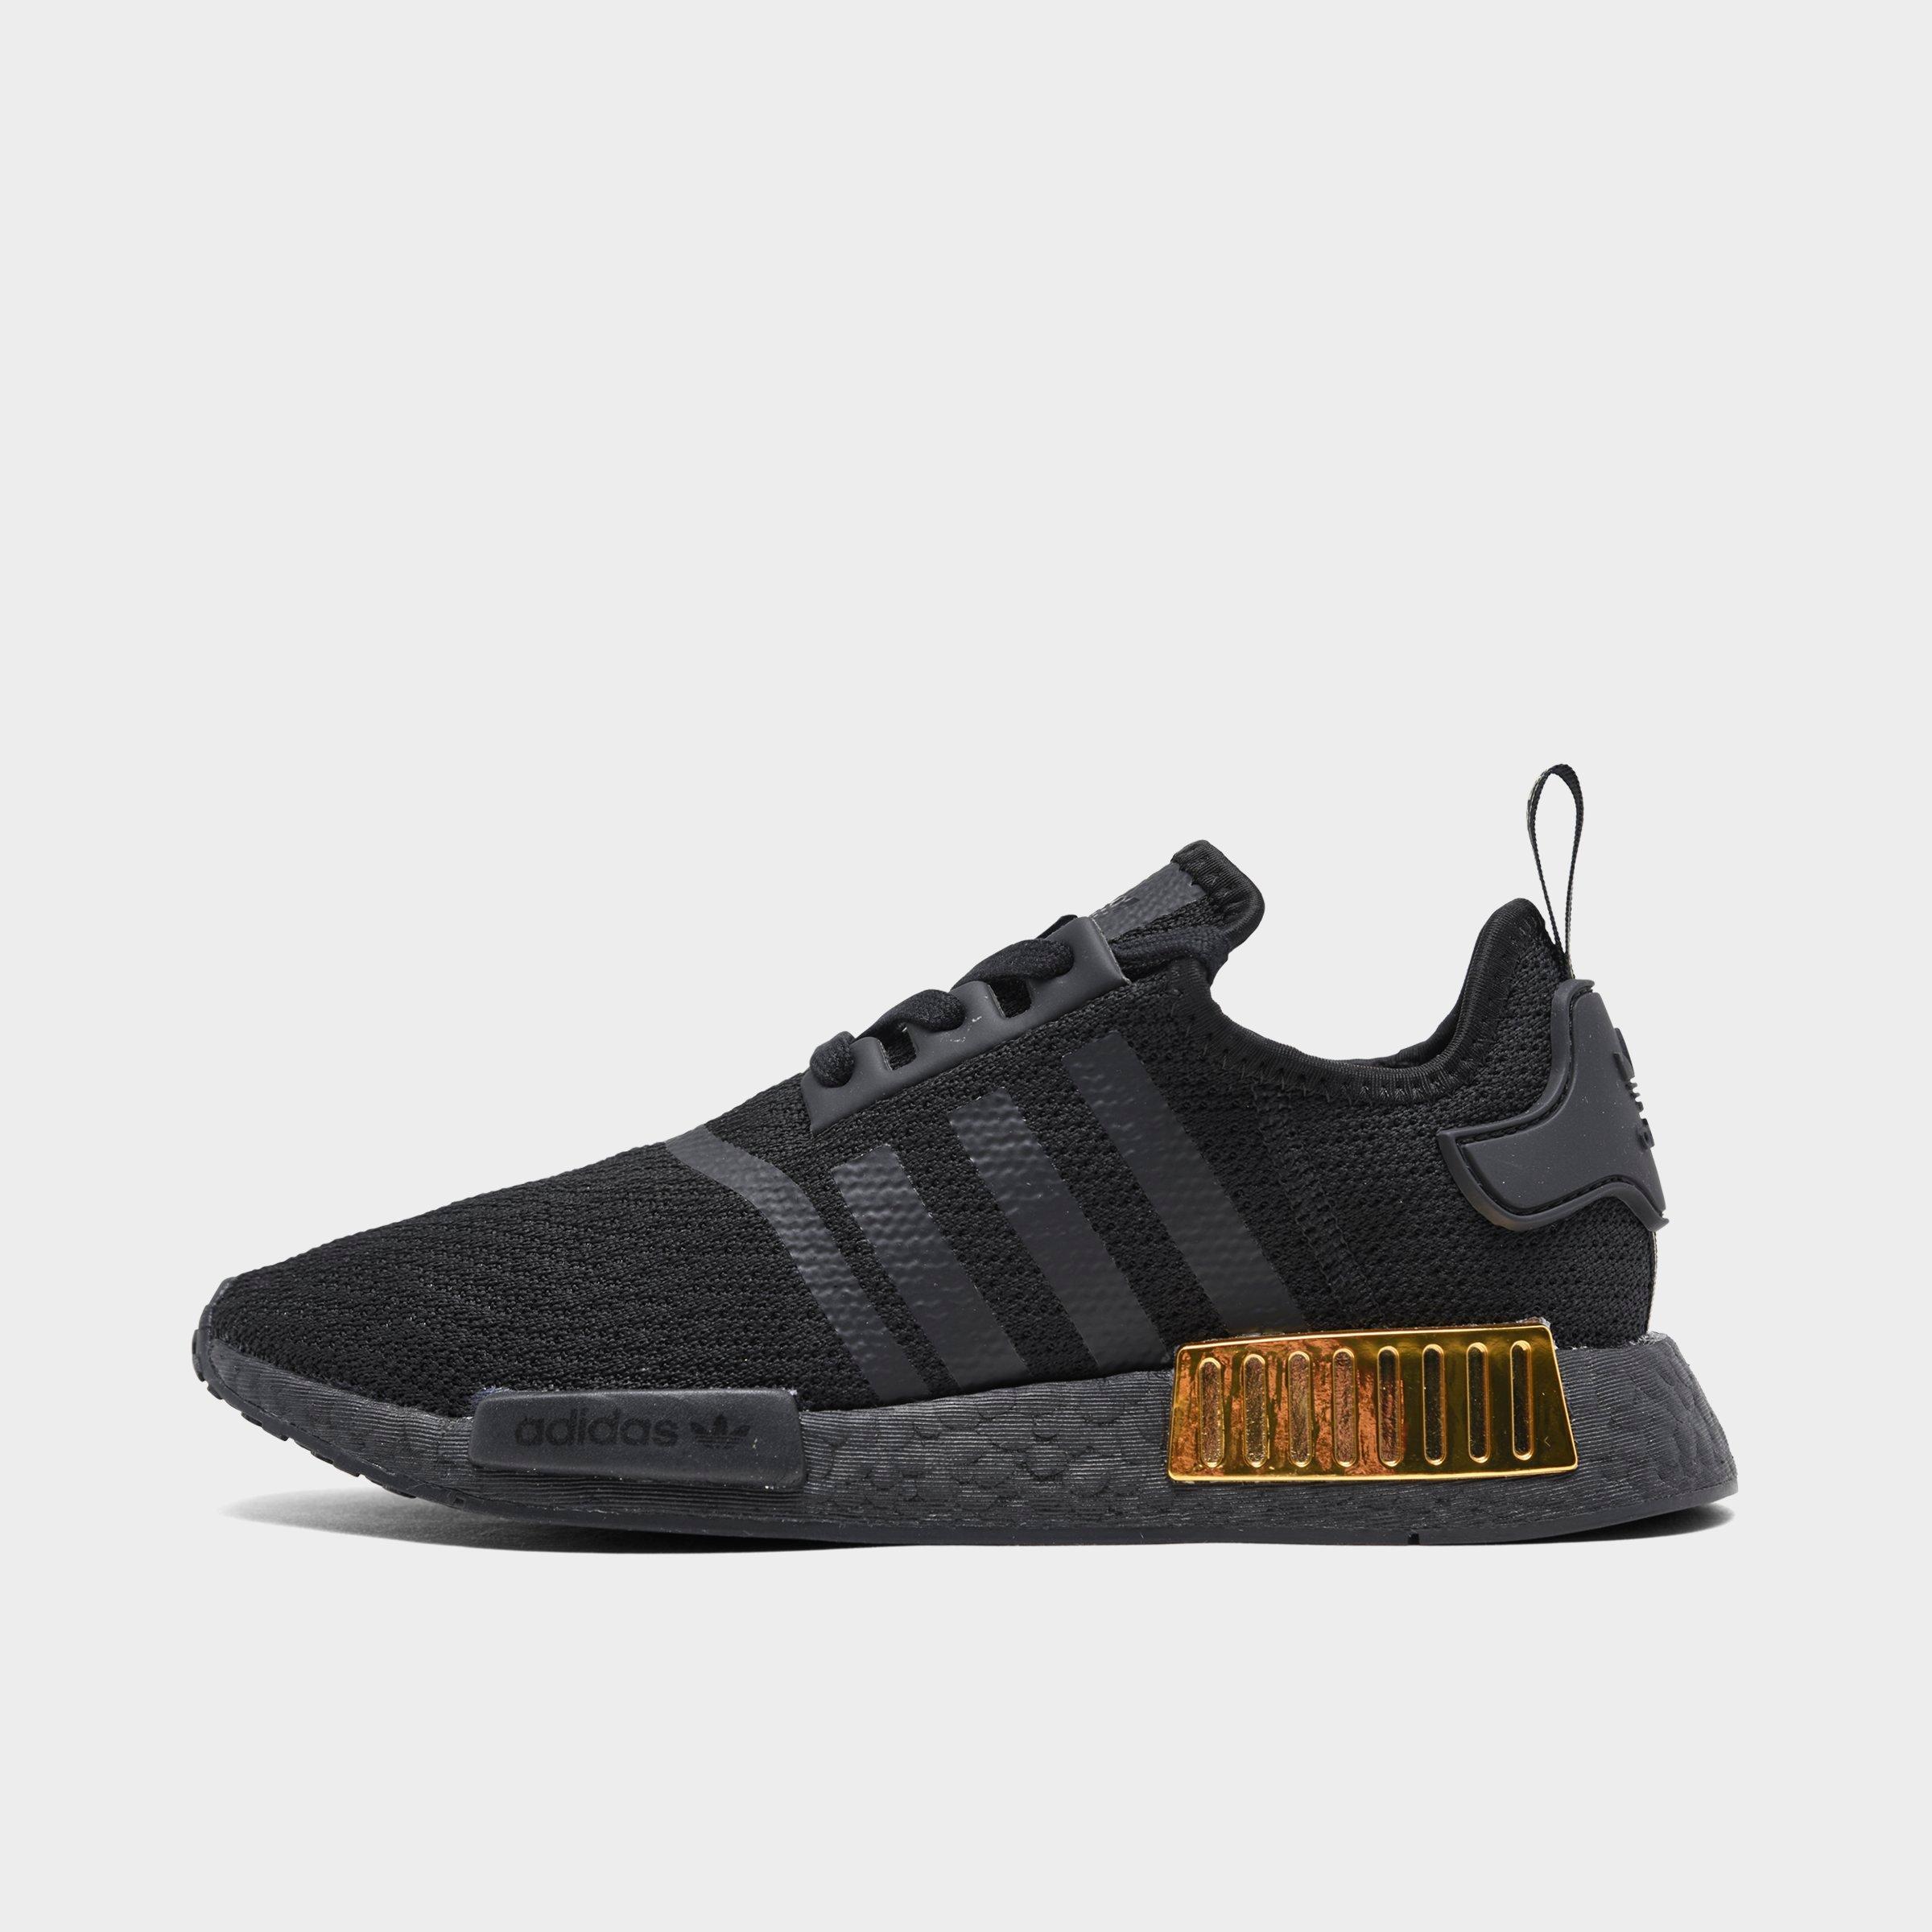 nmd rl shoes